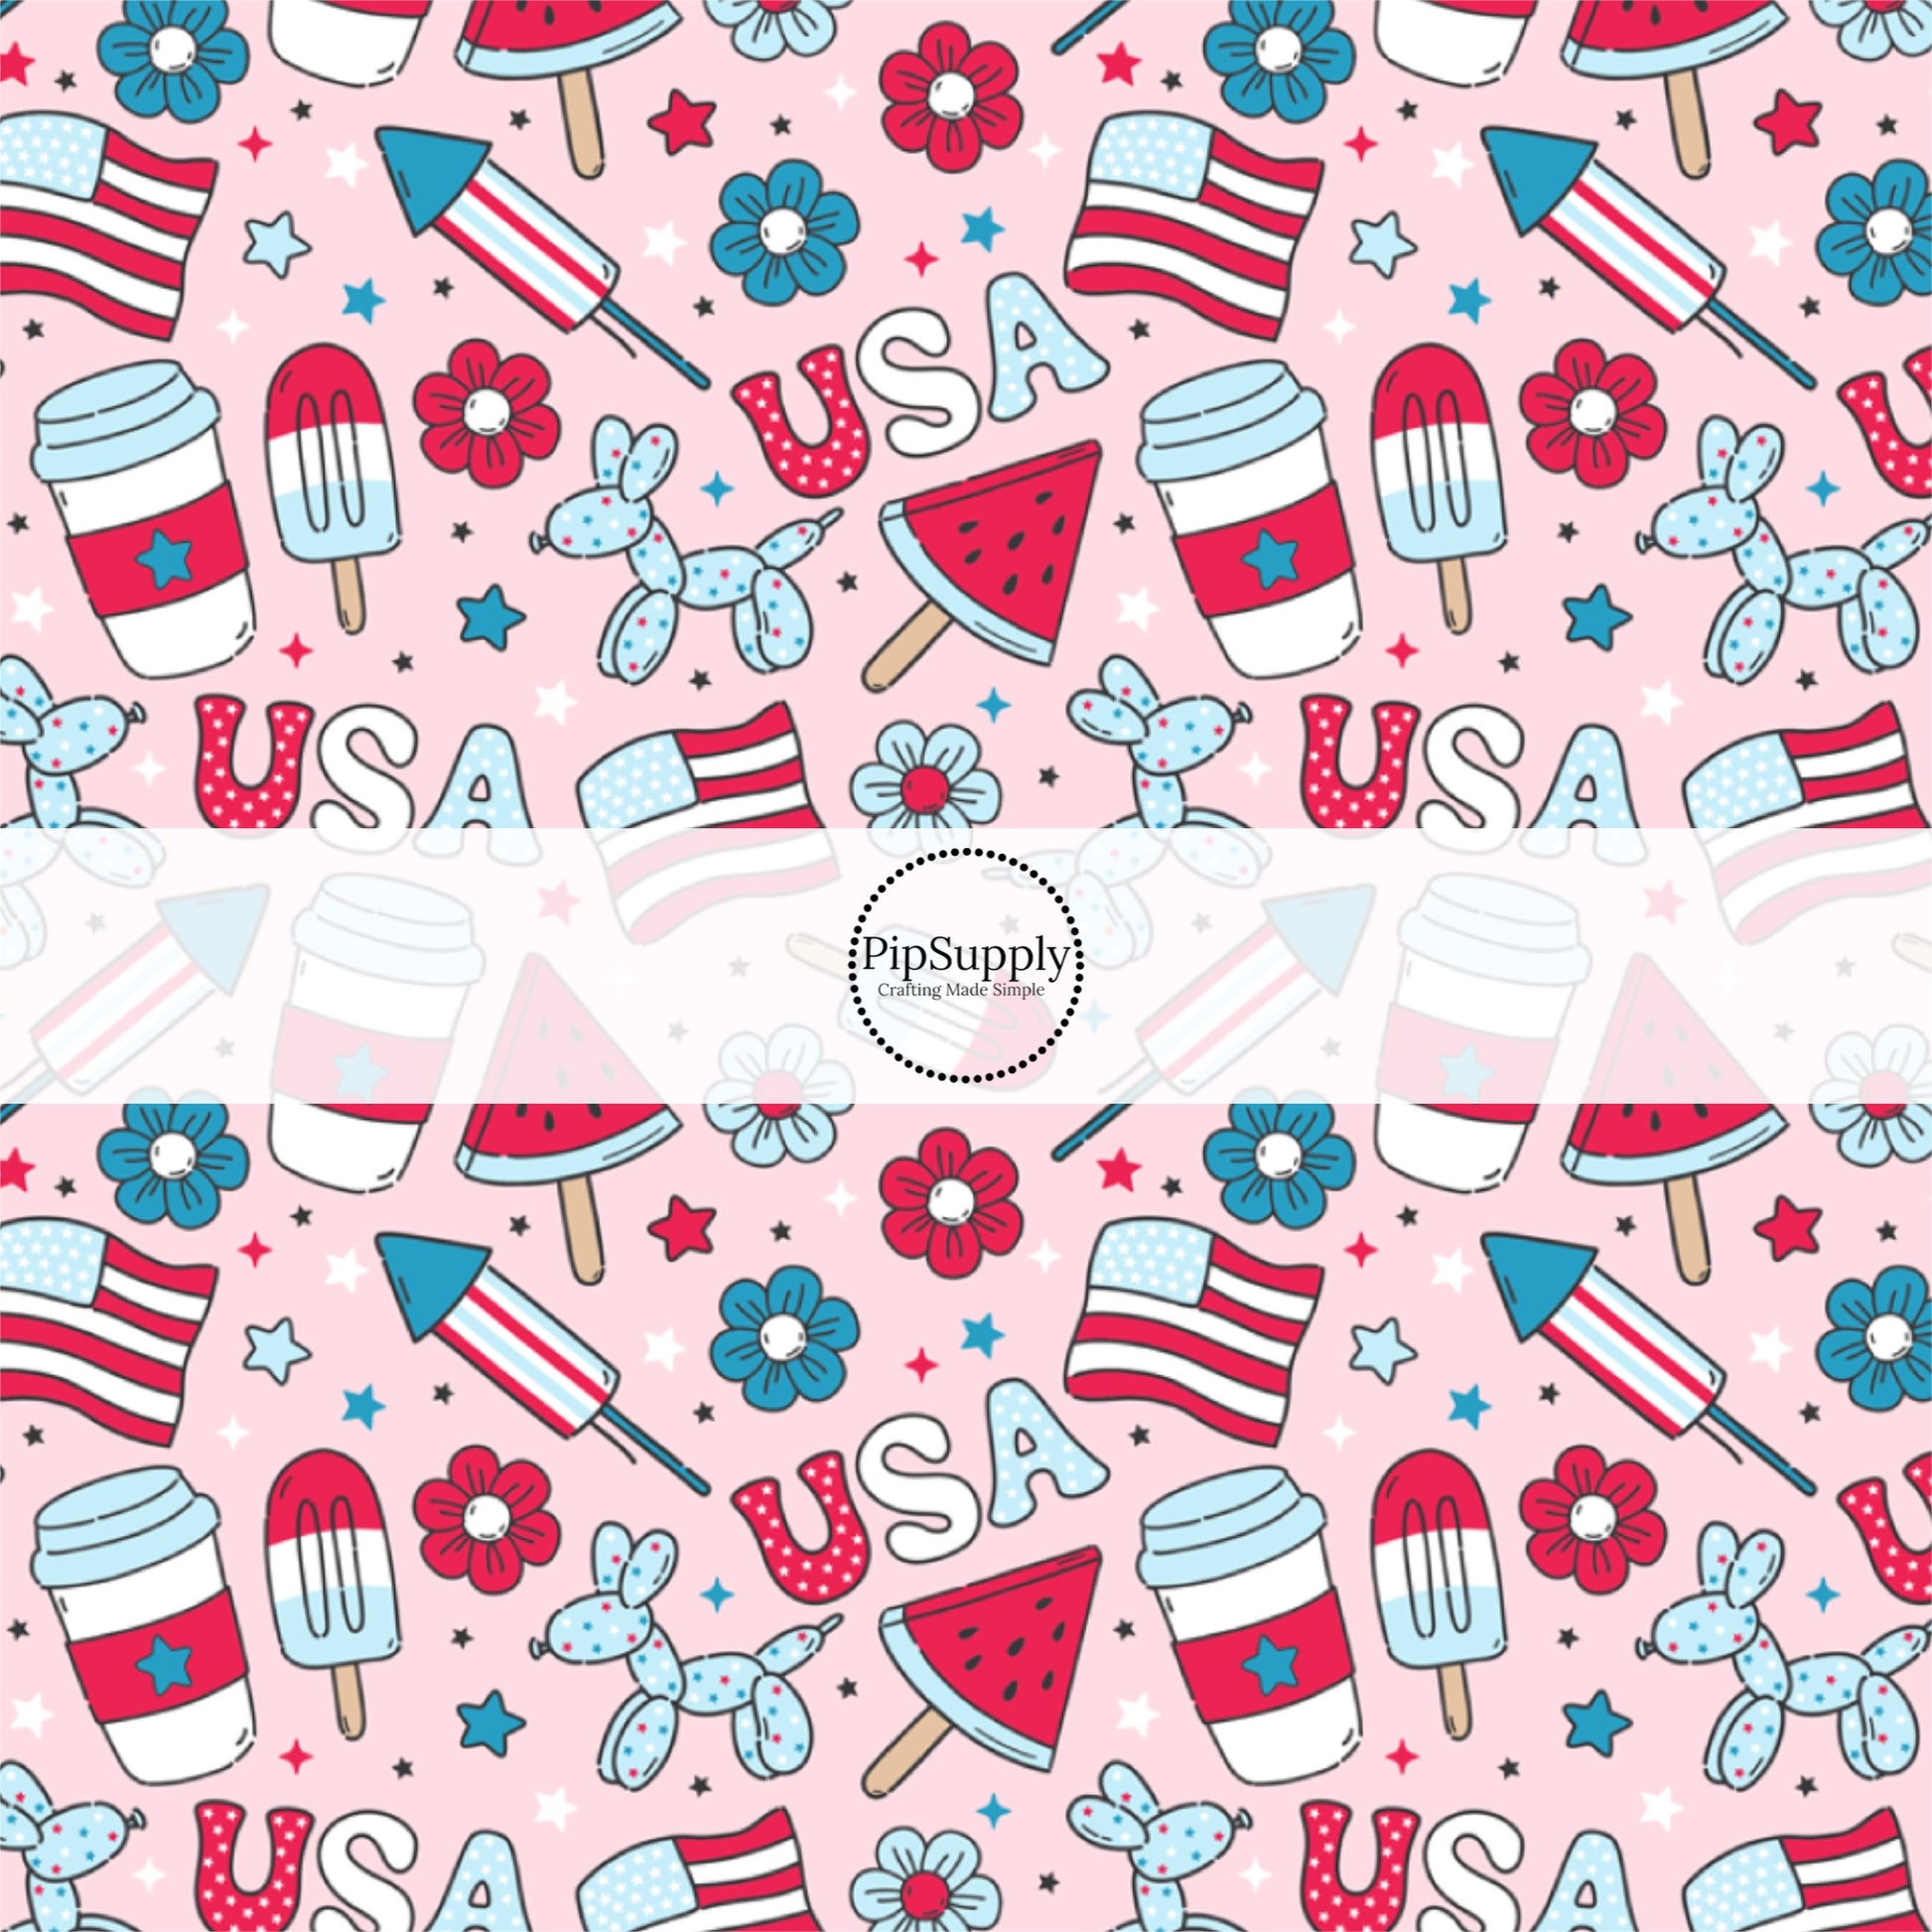 This 4th of July fabric by the yard features popsicles, fireworks, patterned "USA" words, American flags, and tiny patriotic stars. This fun patriotic themed fabric can be used for all your sewing and crafting needs!